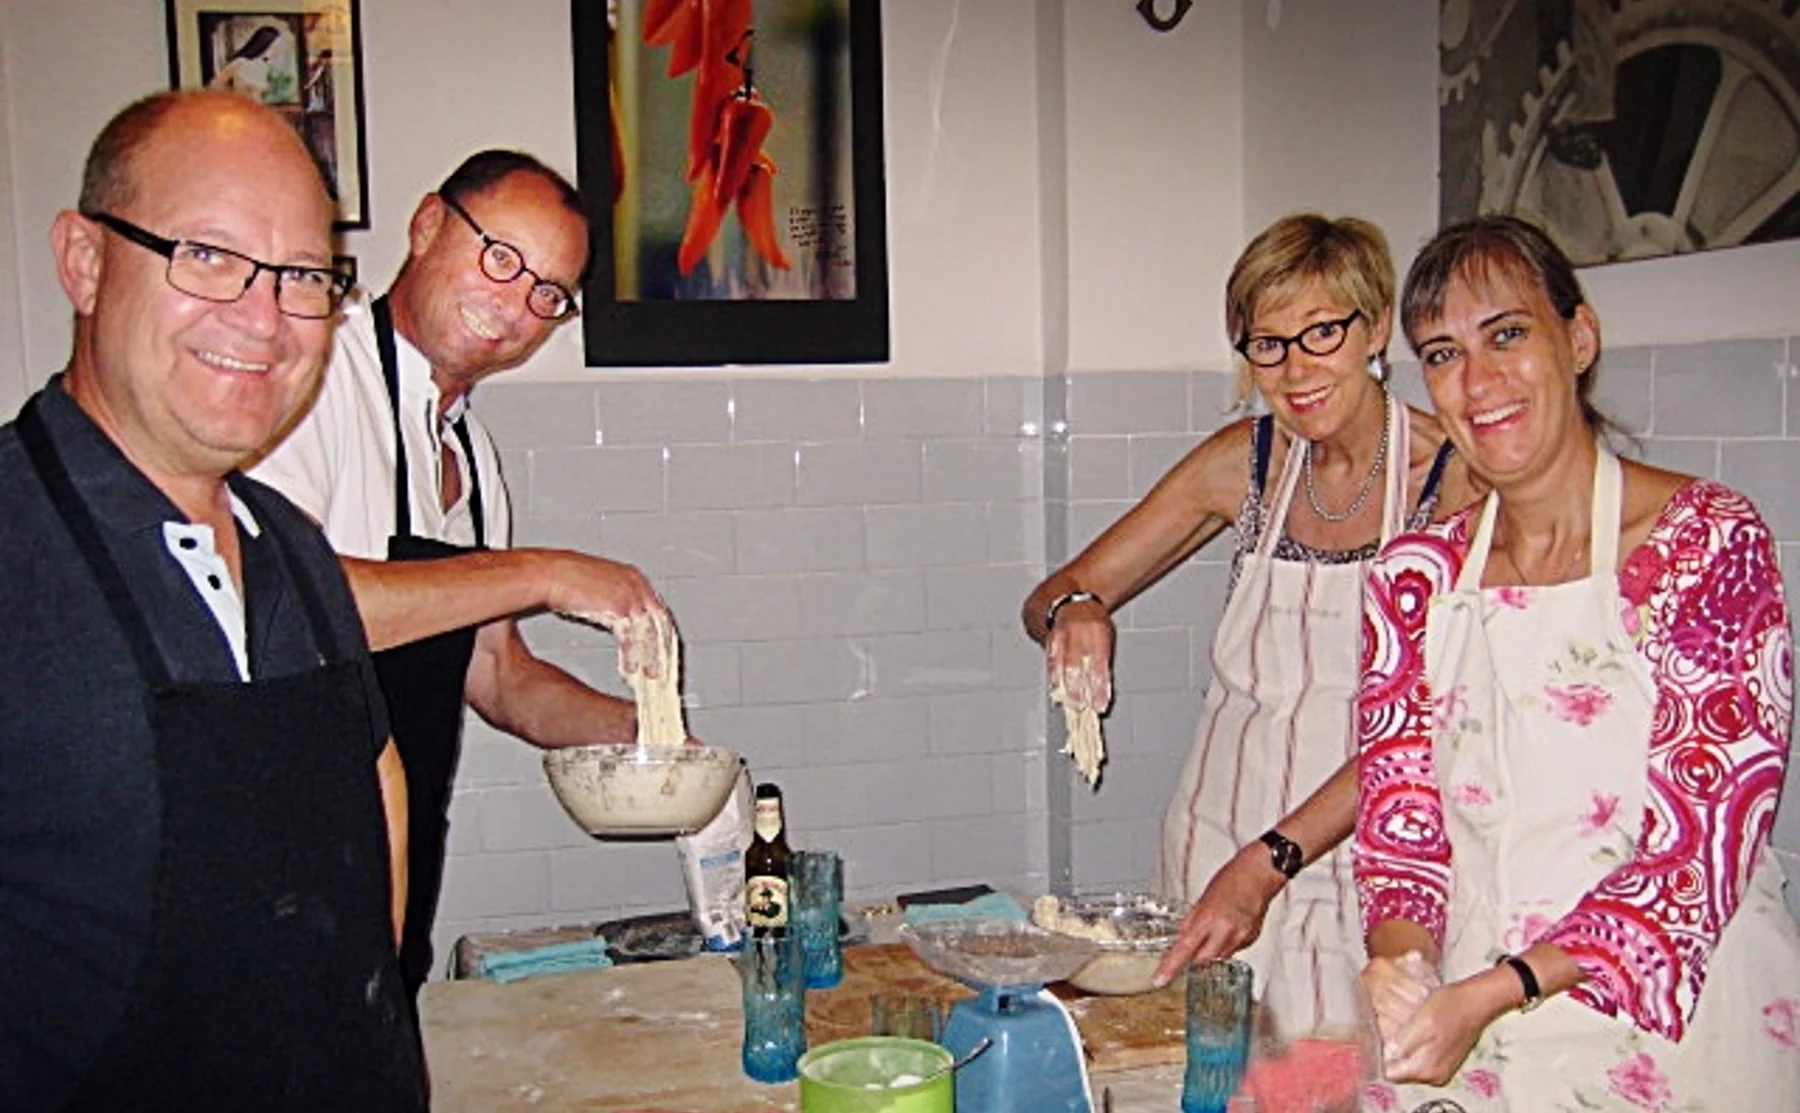 Professional Pizza Workshop in Rome With a Brilliant Italian Chef - 1090802